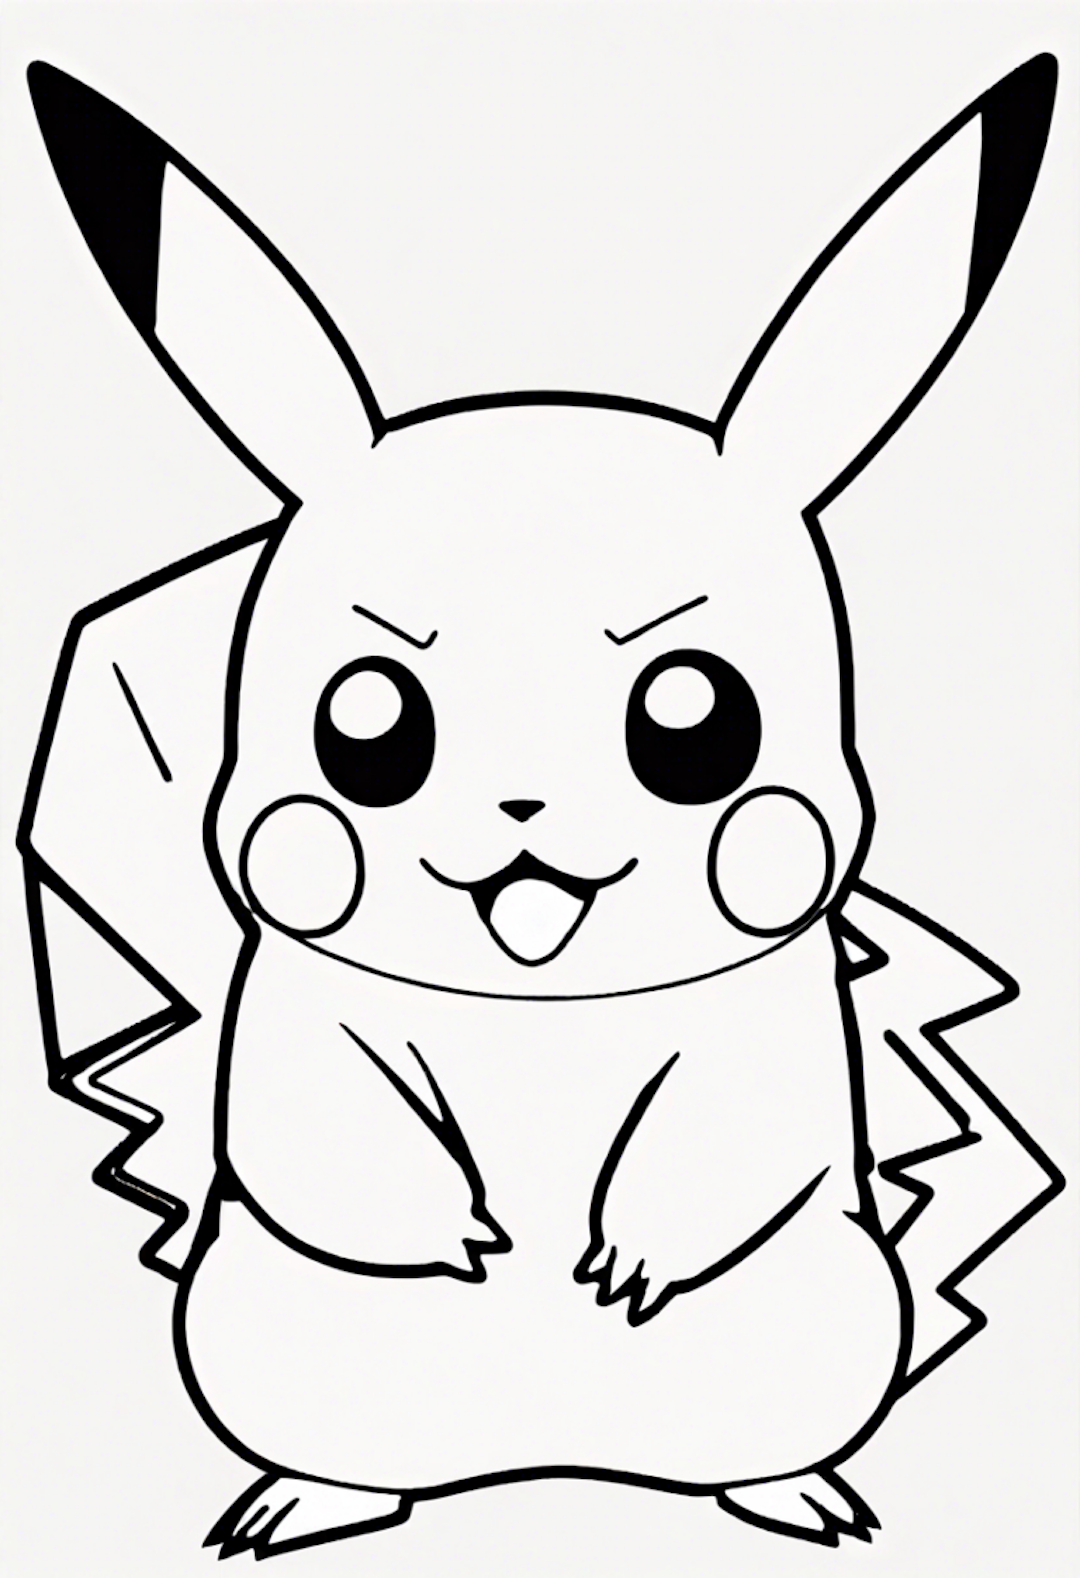 Worried Pikachu coloring pages